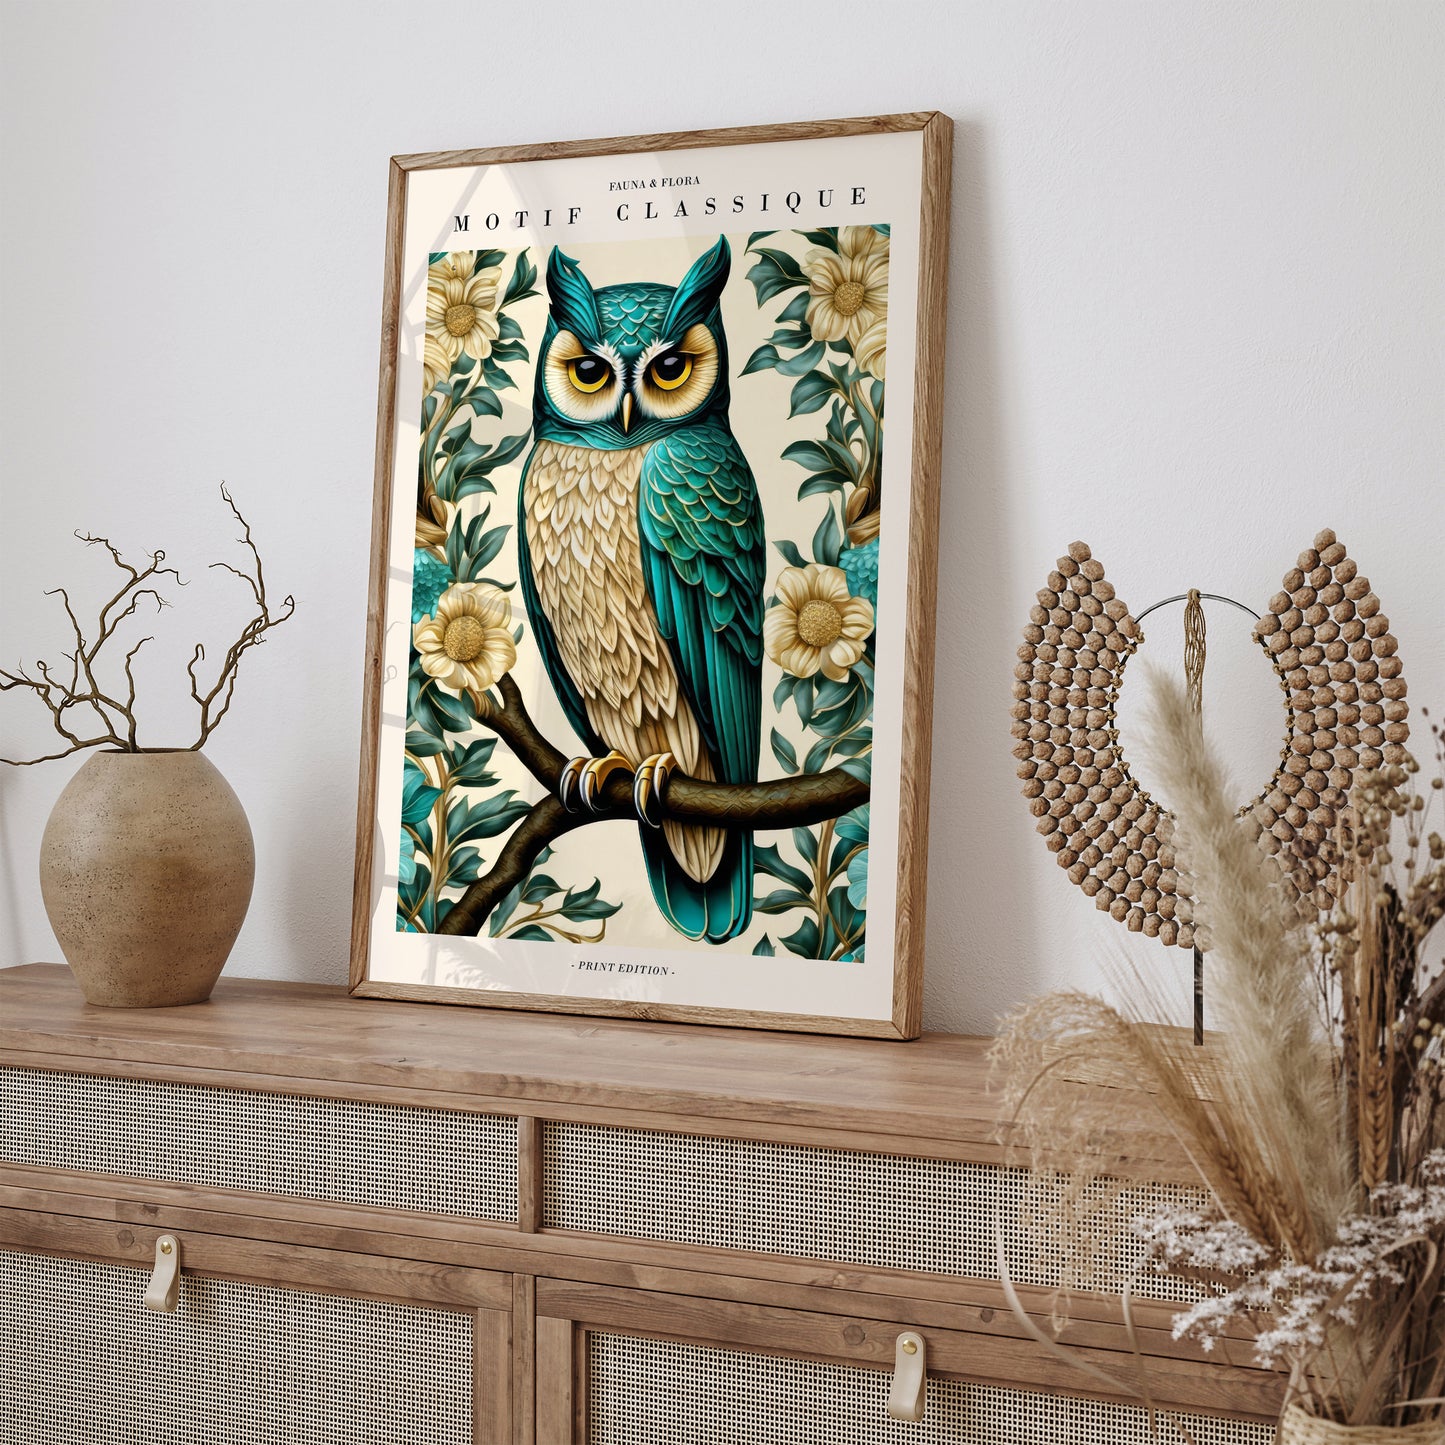 Artful Wall Décor in William Morris Style